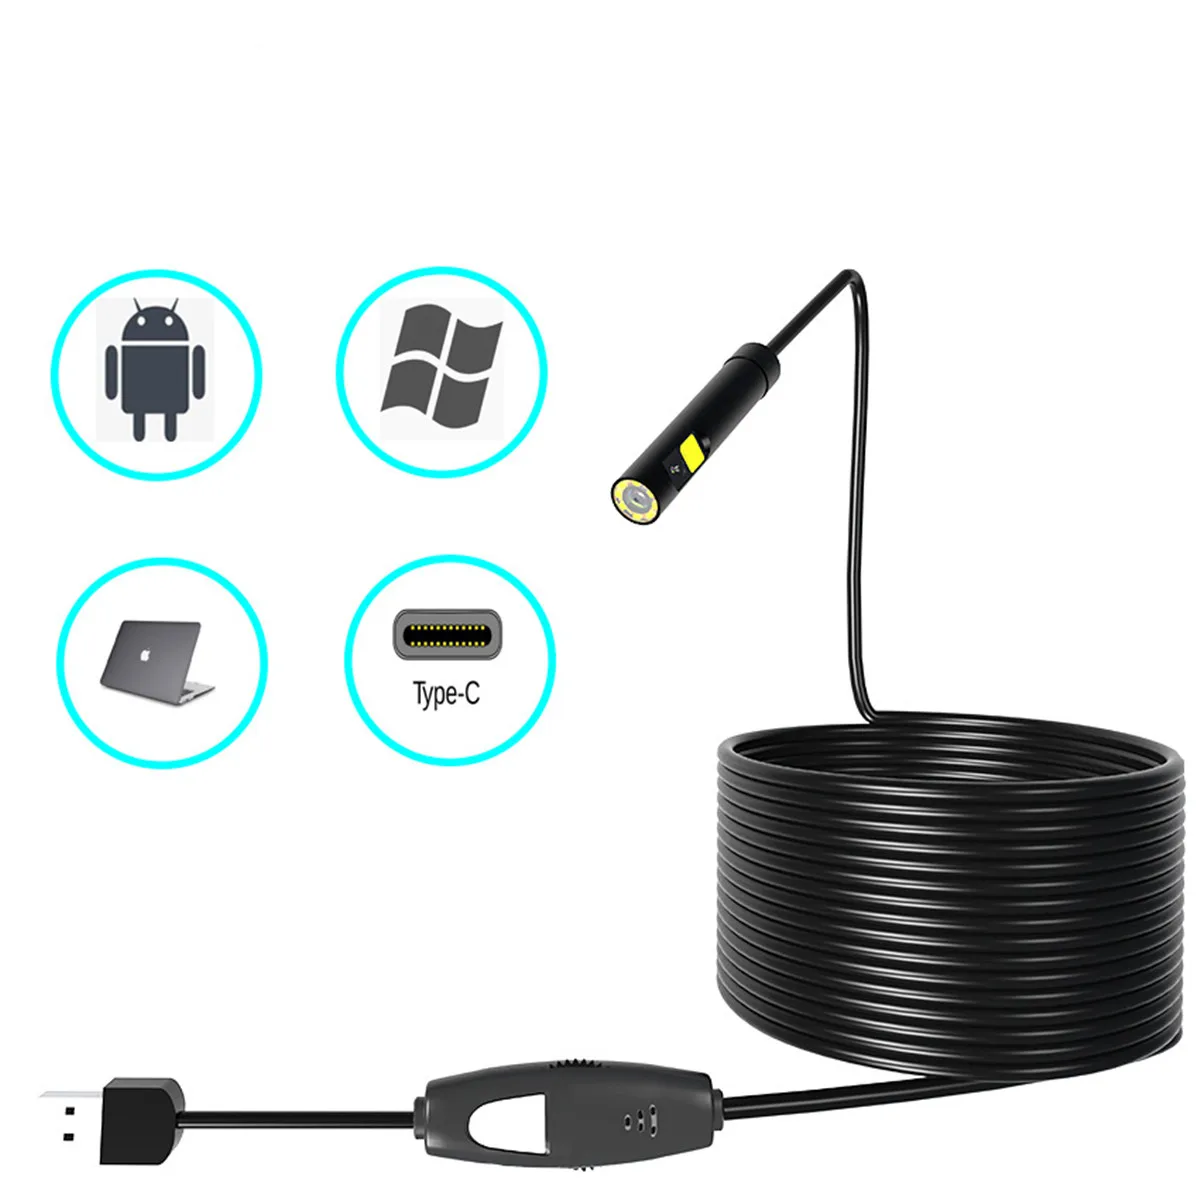 2MP 8MM 3in1 USB Dual Lens Endoscope Camera For Android&Computer CMOS Borescope Inspection  Digital Microscope Otoscope 5 5mm lens 1m 5m cable endoscope type c usb pc android endoscope camera 3in1 borescope inspection camera take photos led light